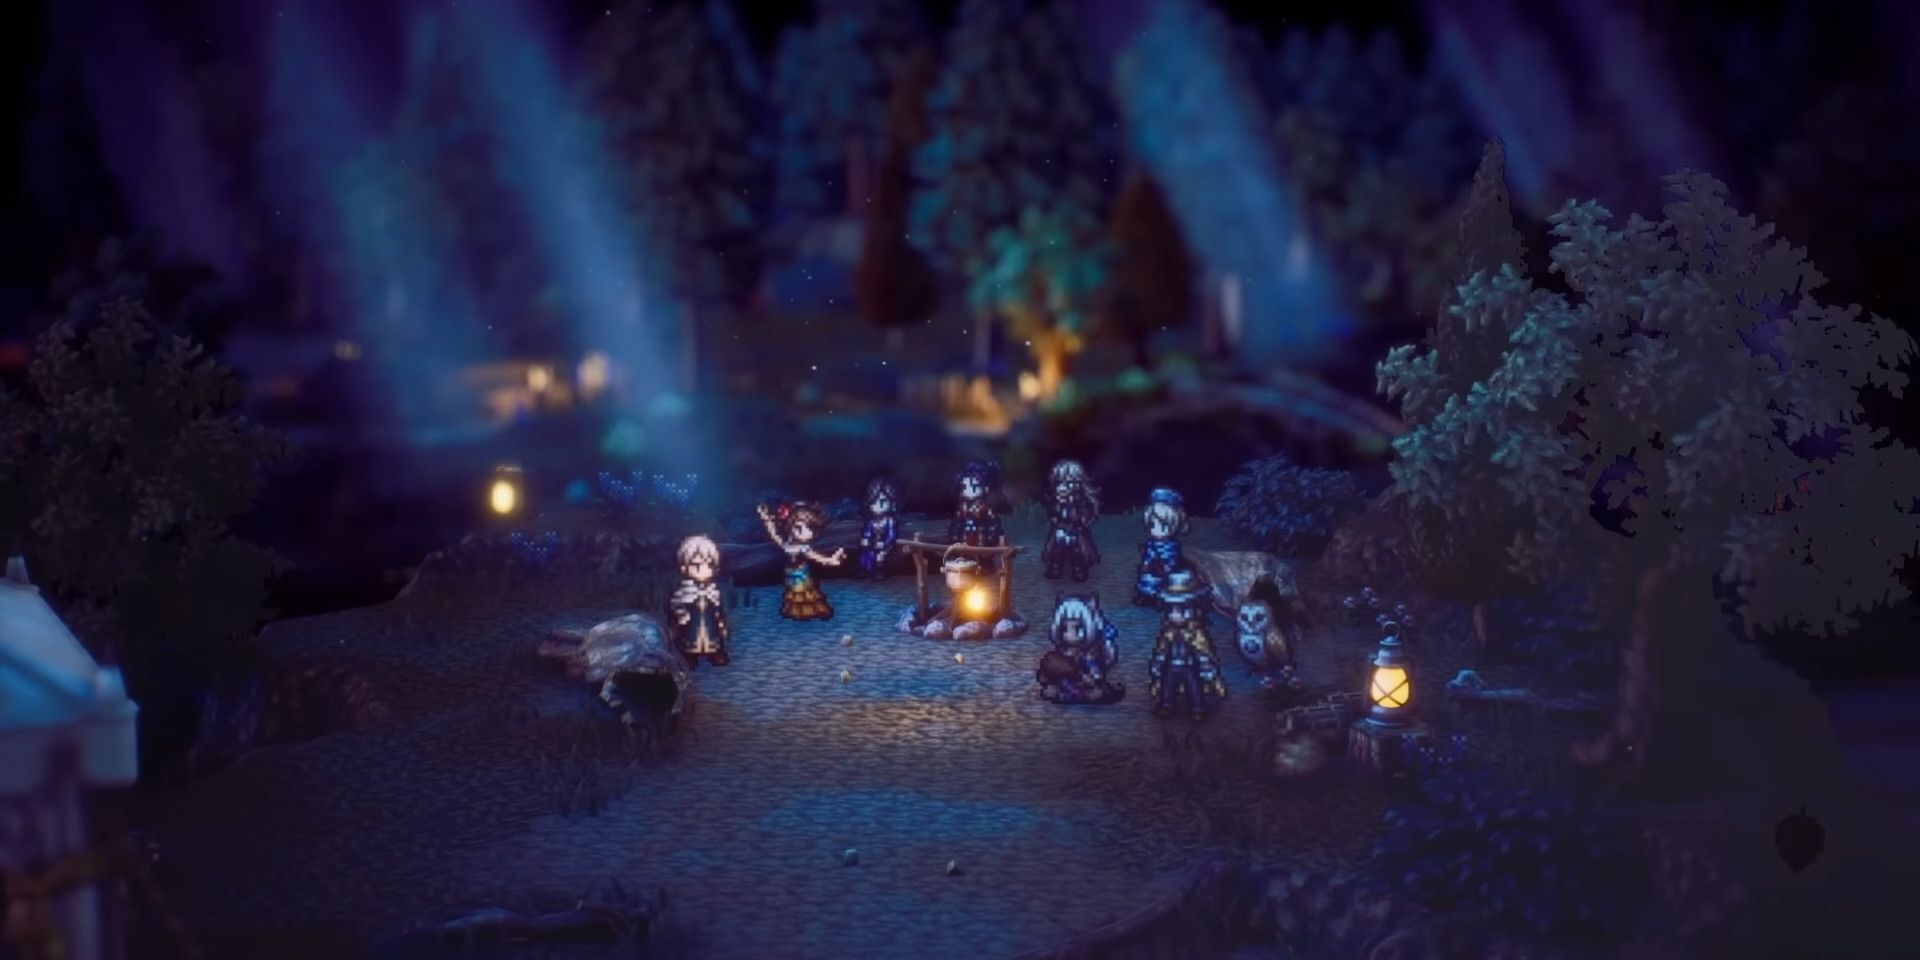 In-game screenshot of Octopath Traveler 2's main characters gathered around a campfire in a dimly lit forest.